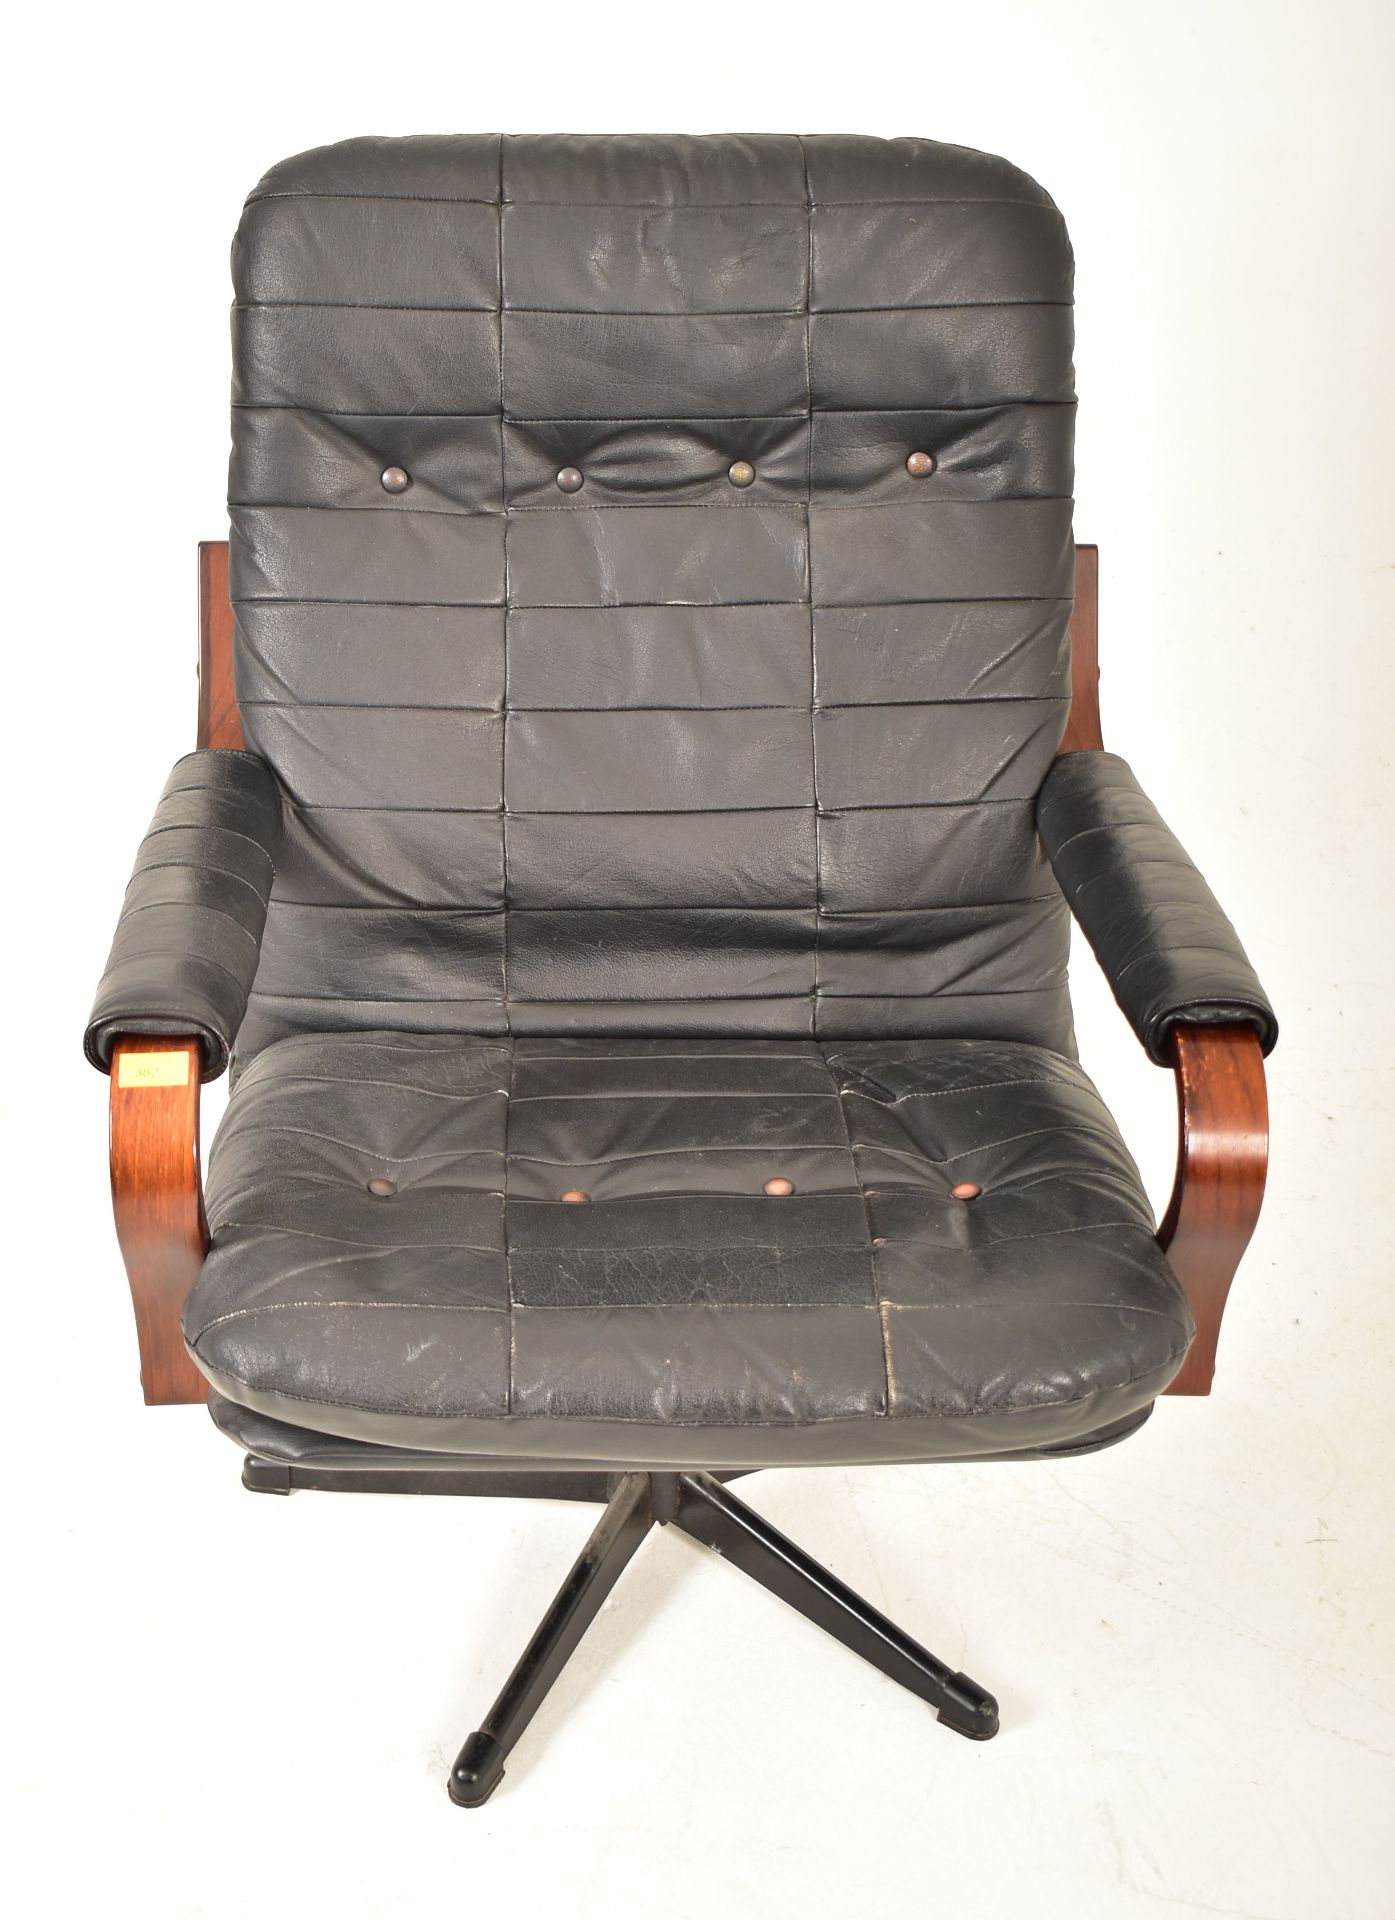 1970S SWEDISH DESIGN LEATHER AND BENTWOOD ARMCHAIR - Image 2 of 5